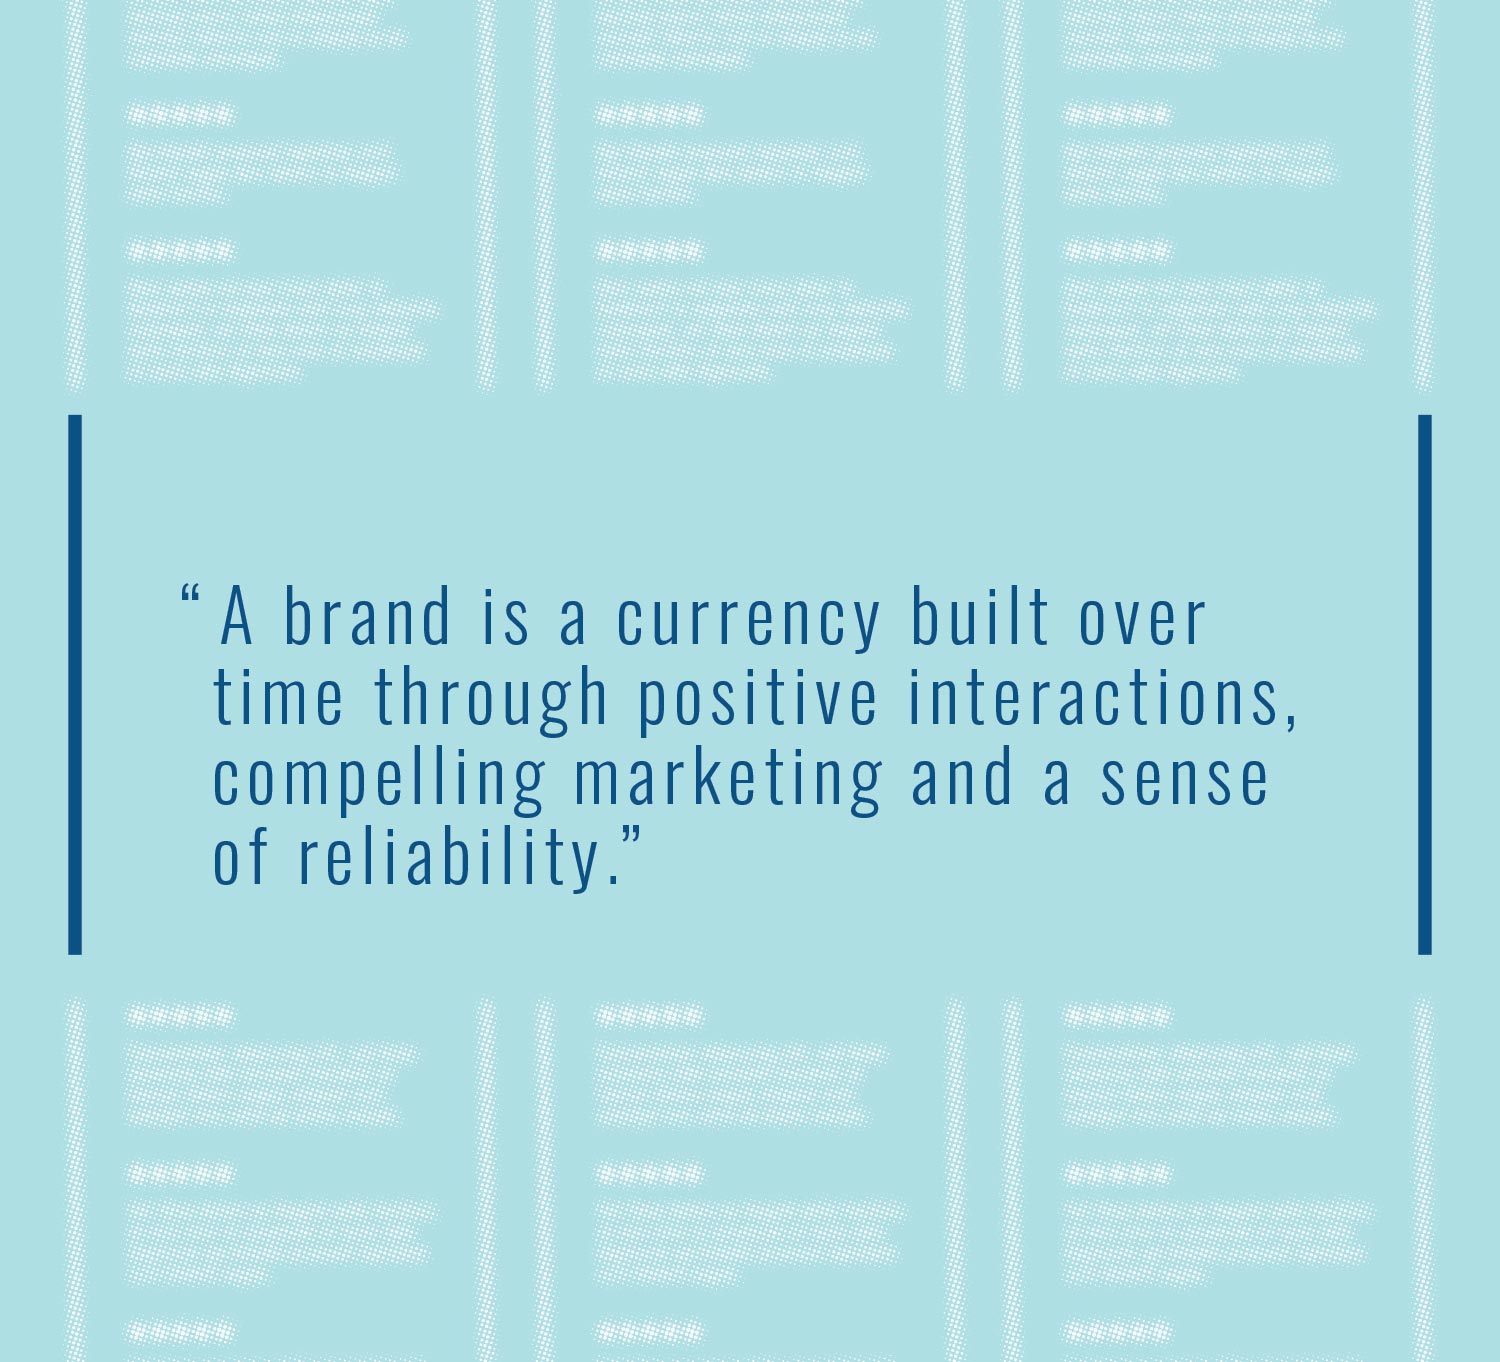 A brand is a currency built over time through positive interactions, compelling marketing and a sense of reliability.